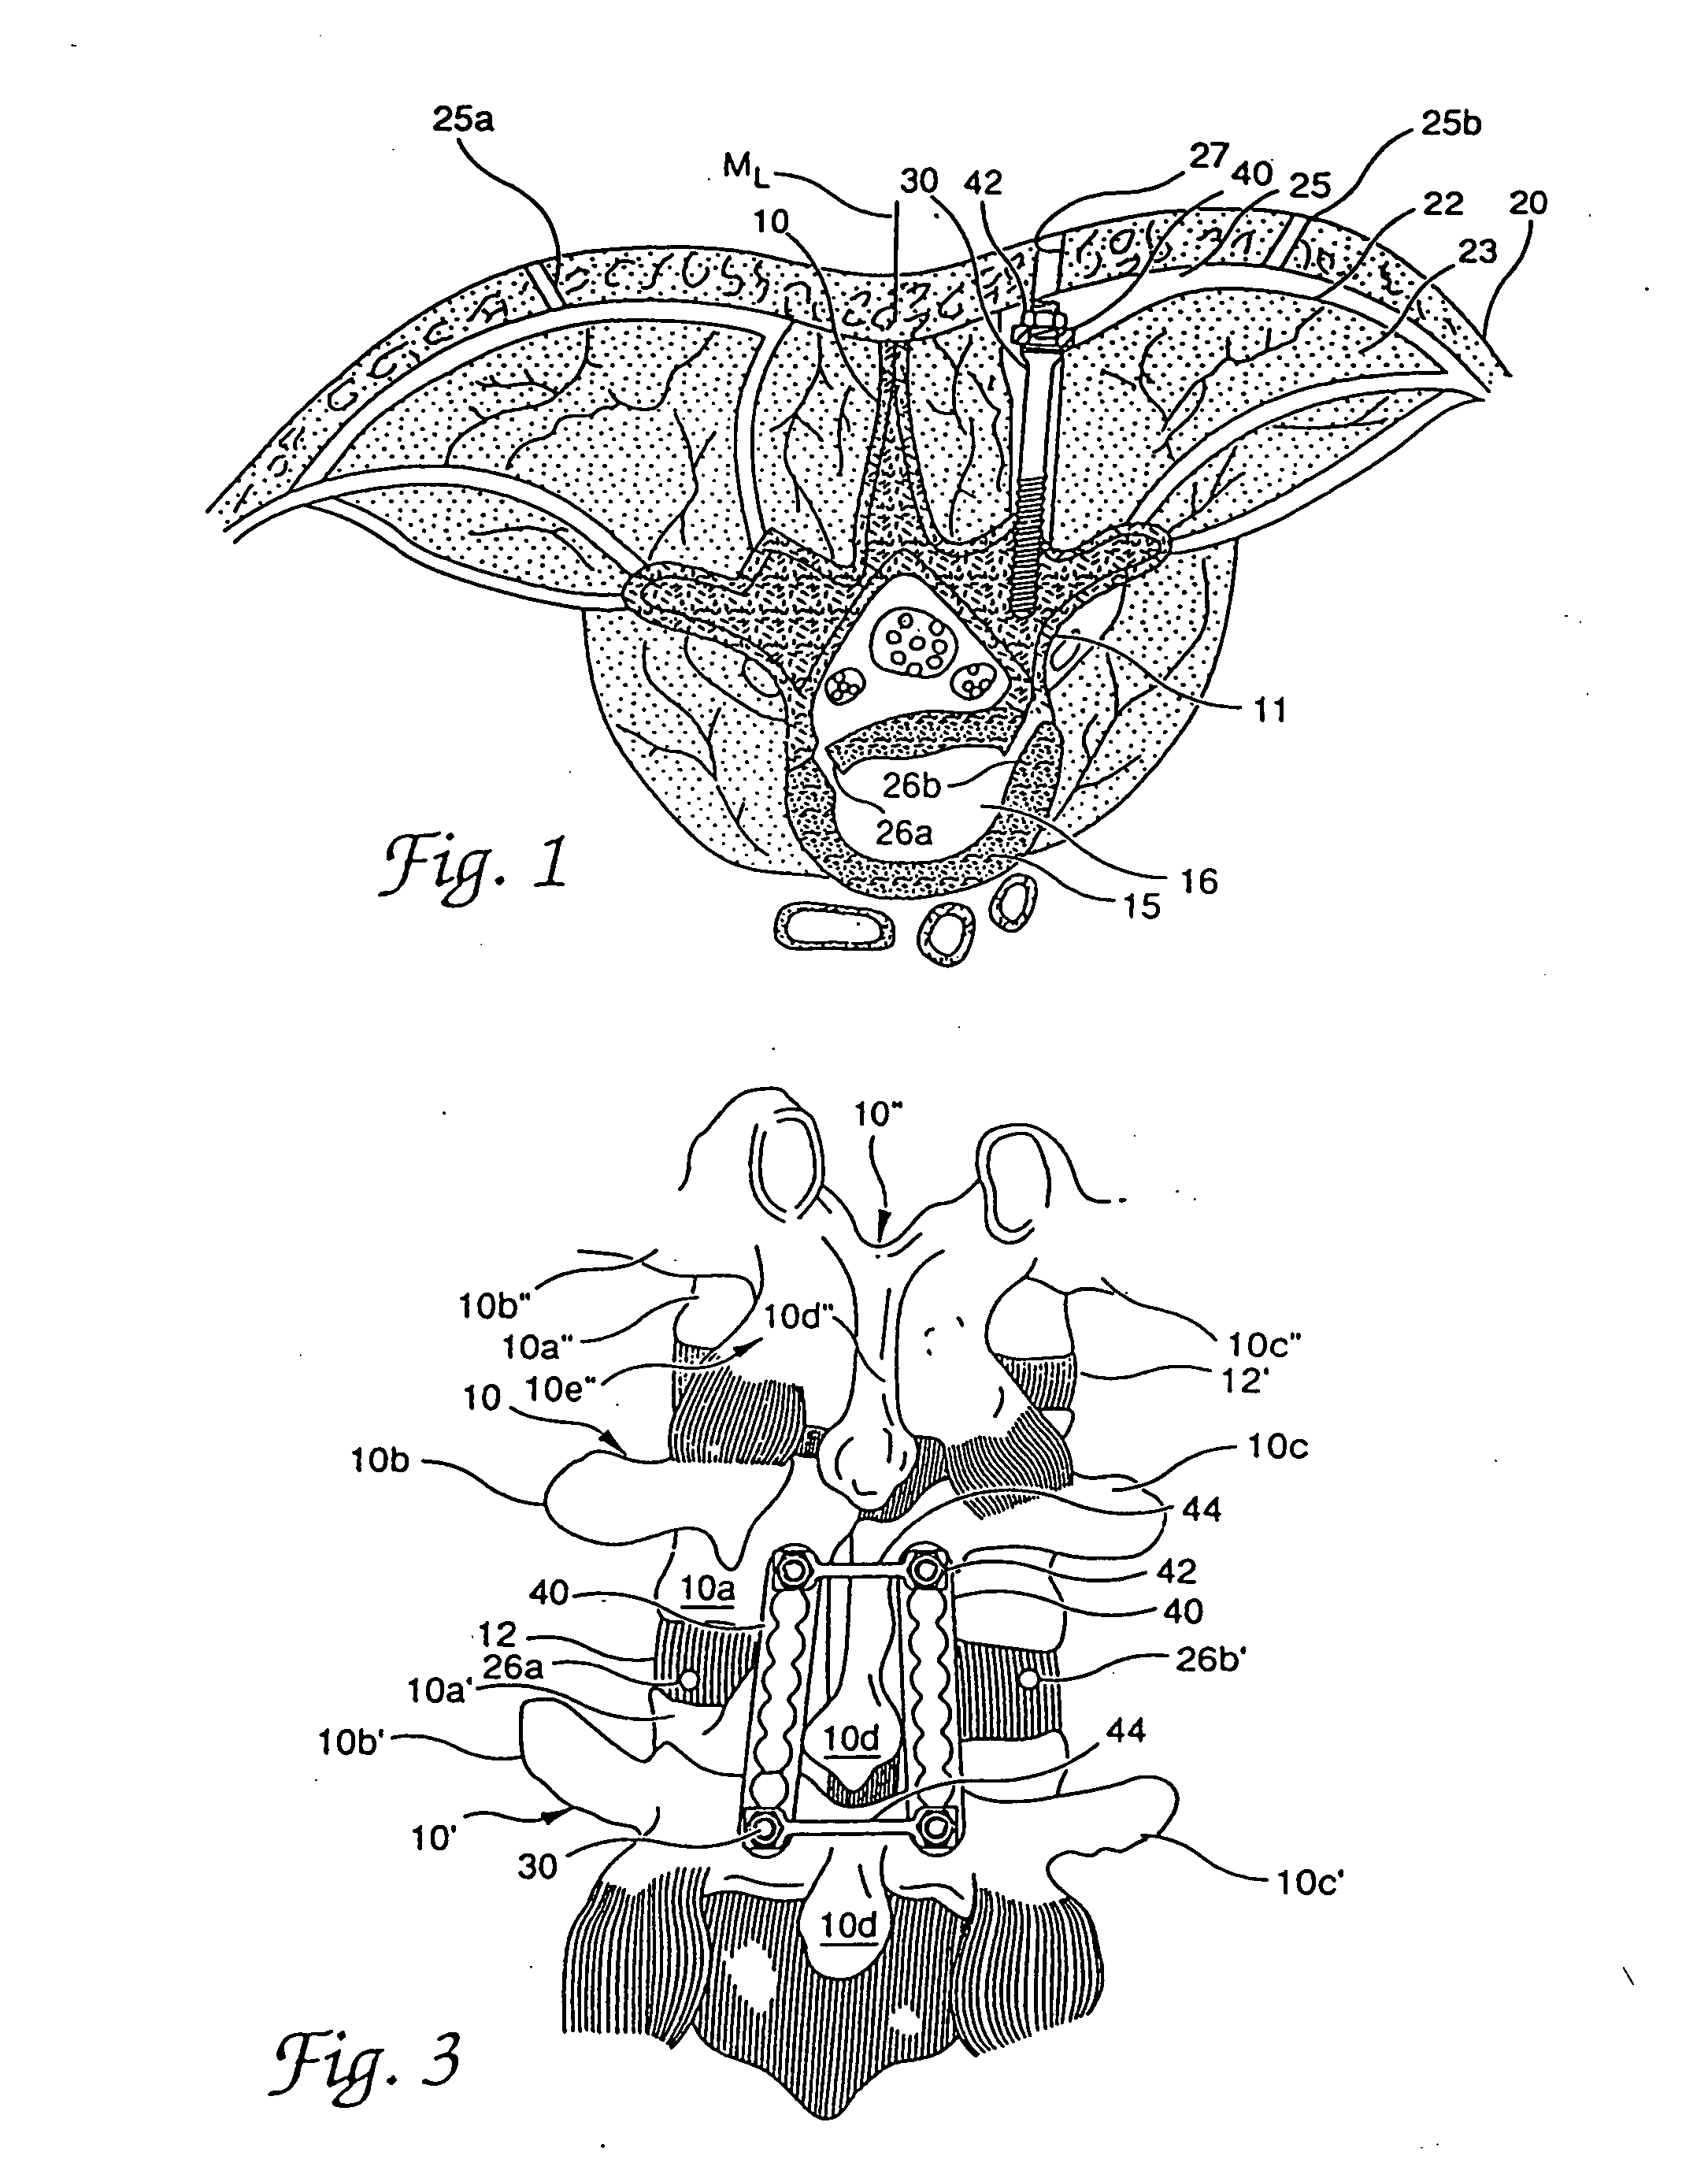 Systems and methods for fixation of adjacent vertebrae